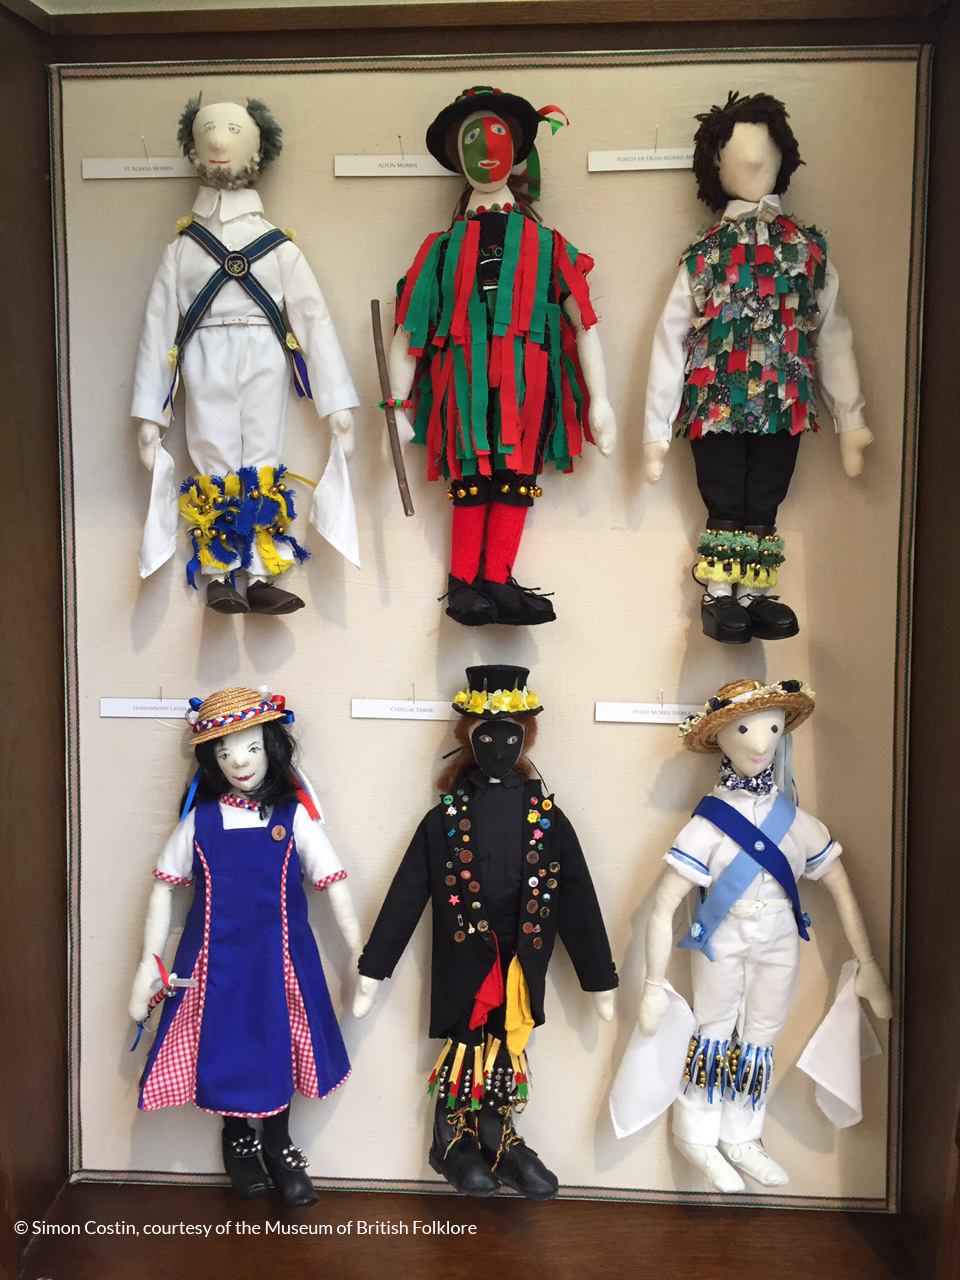 Installation view of Morris Folk figures, shown at Weald and Downland © 2016 Simon Costin, courtesy of the Museum of British Folklore.